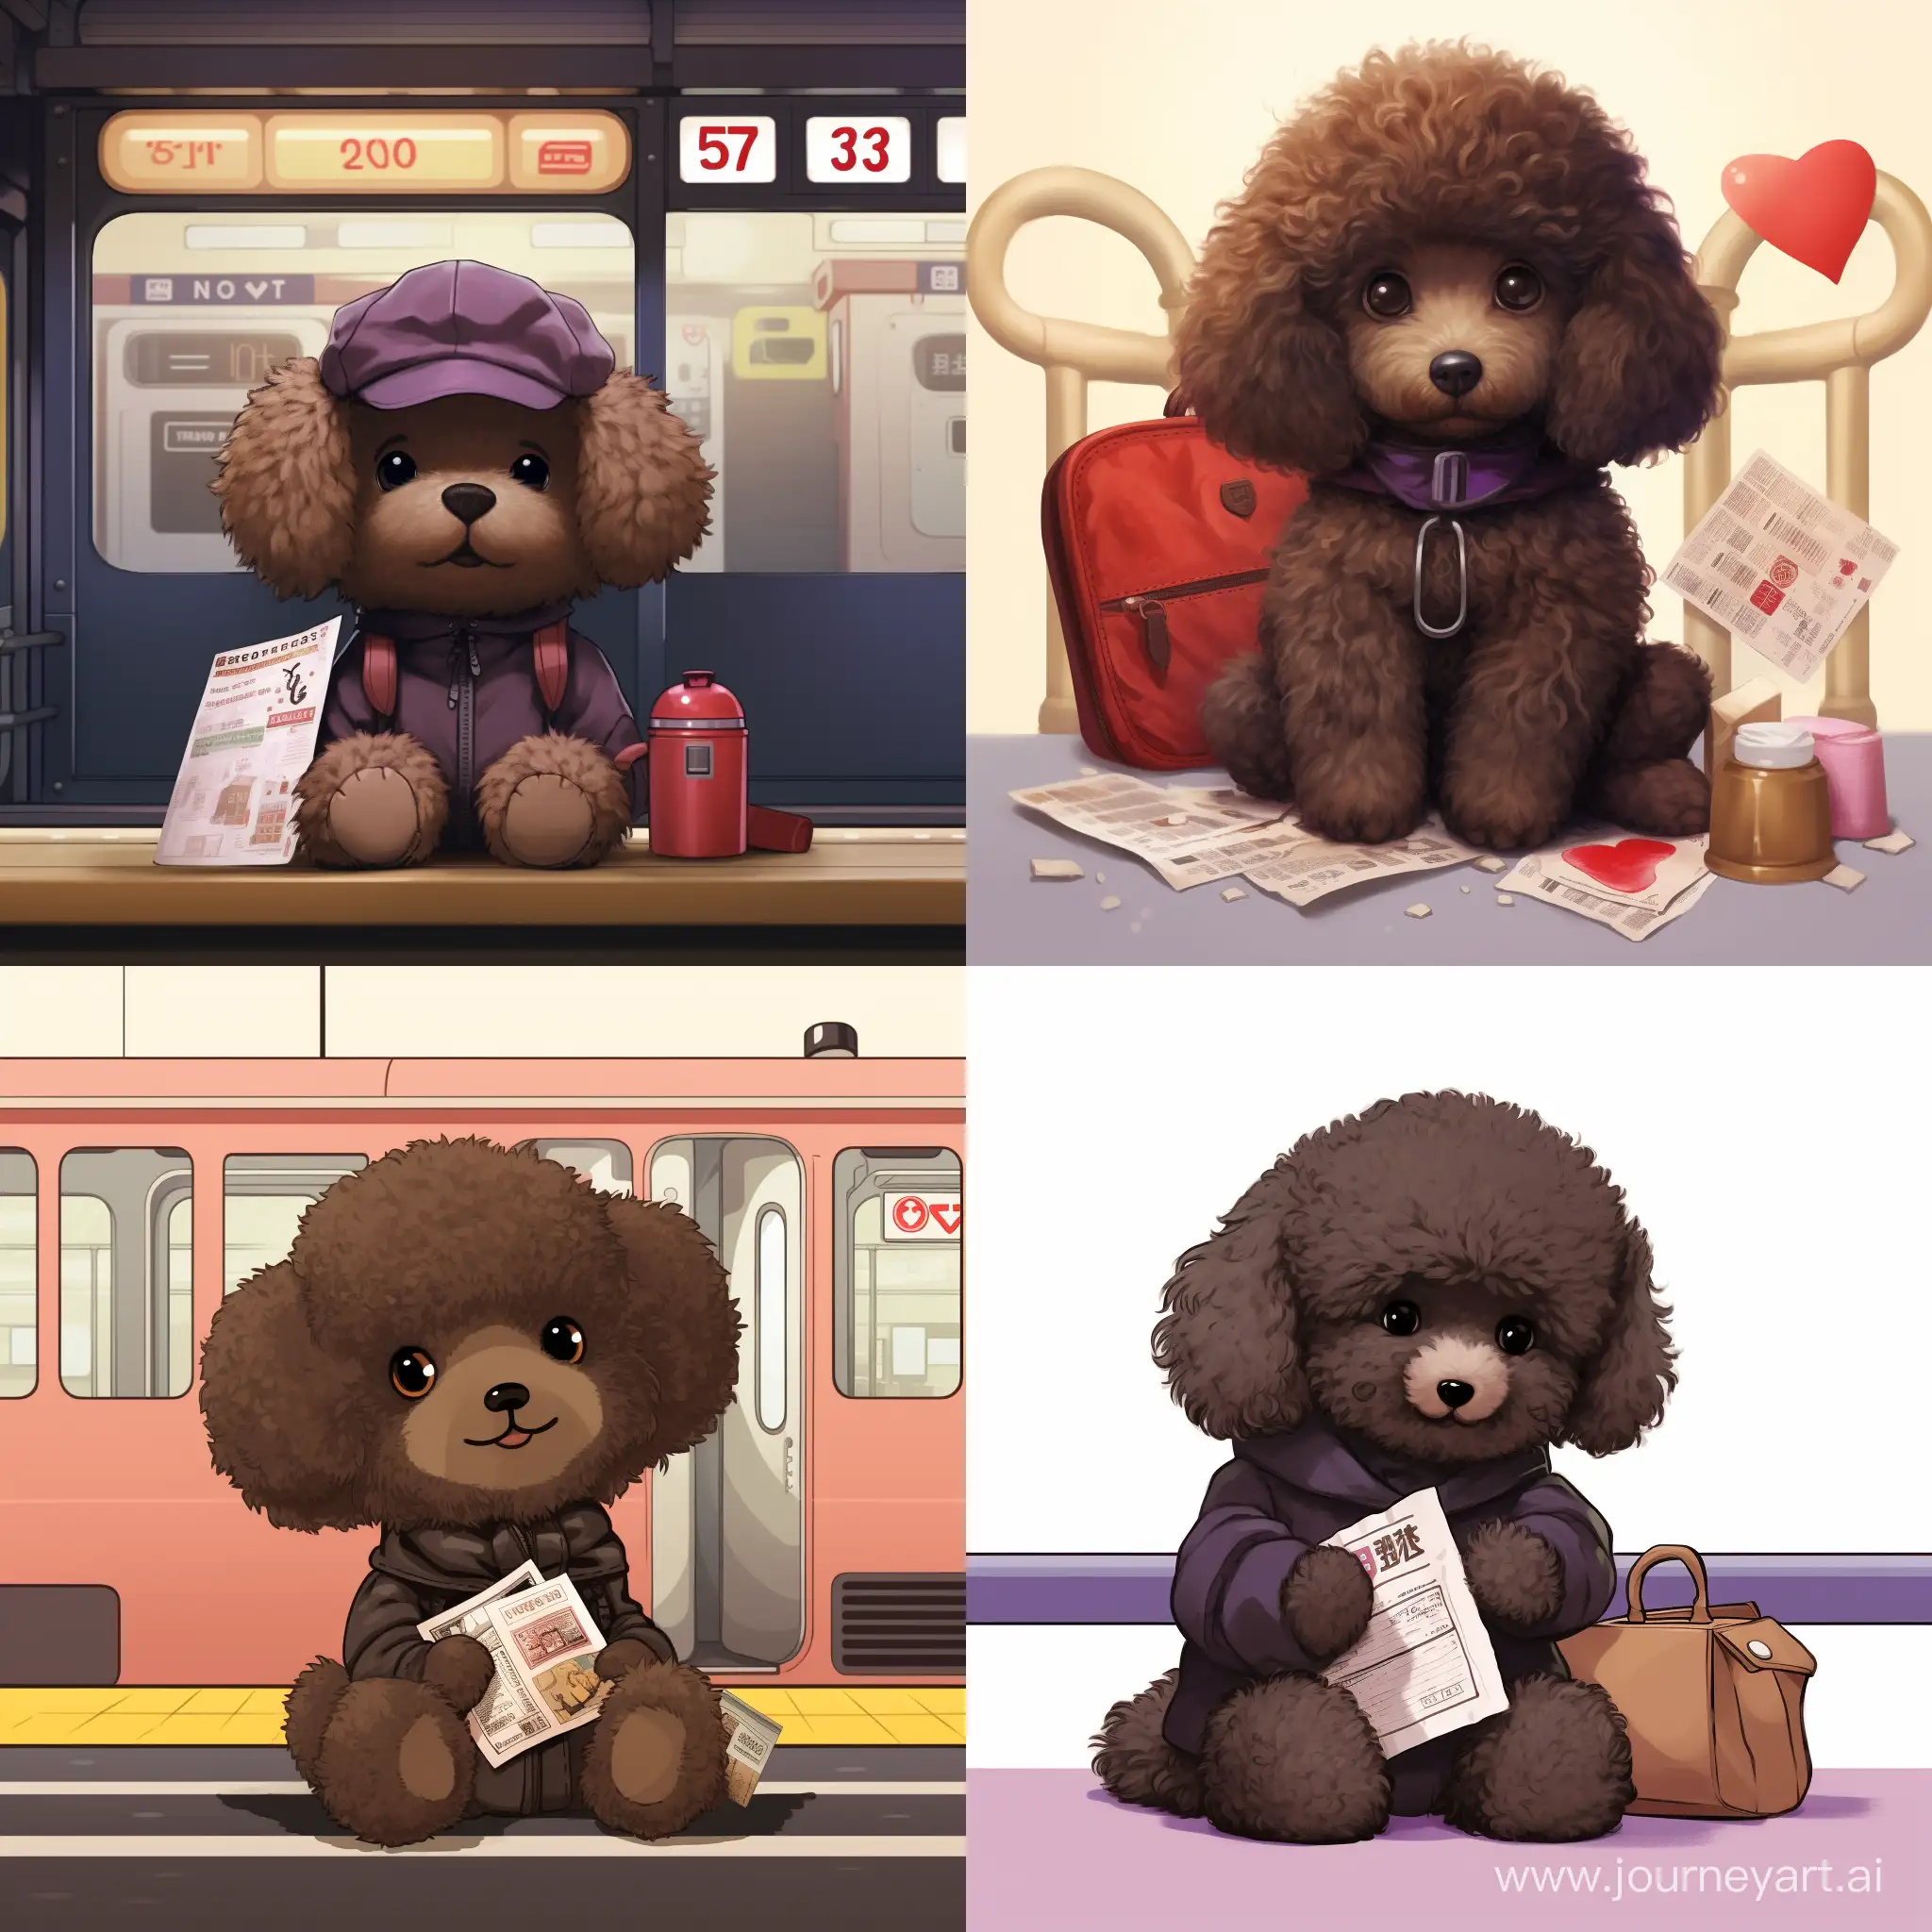 Kawaii-Chocolate-Poodle-Puppy-at-City-Station-with-Train-Ticket